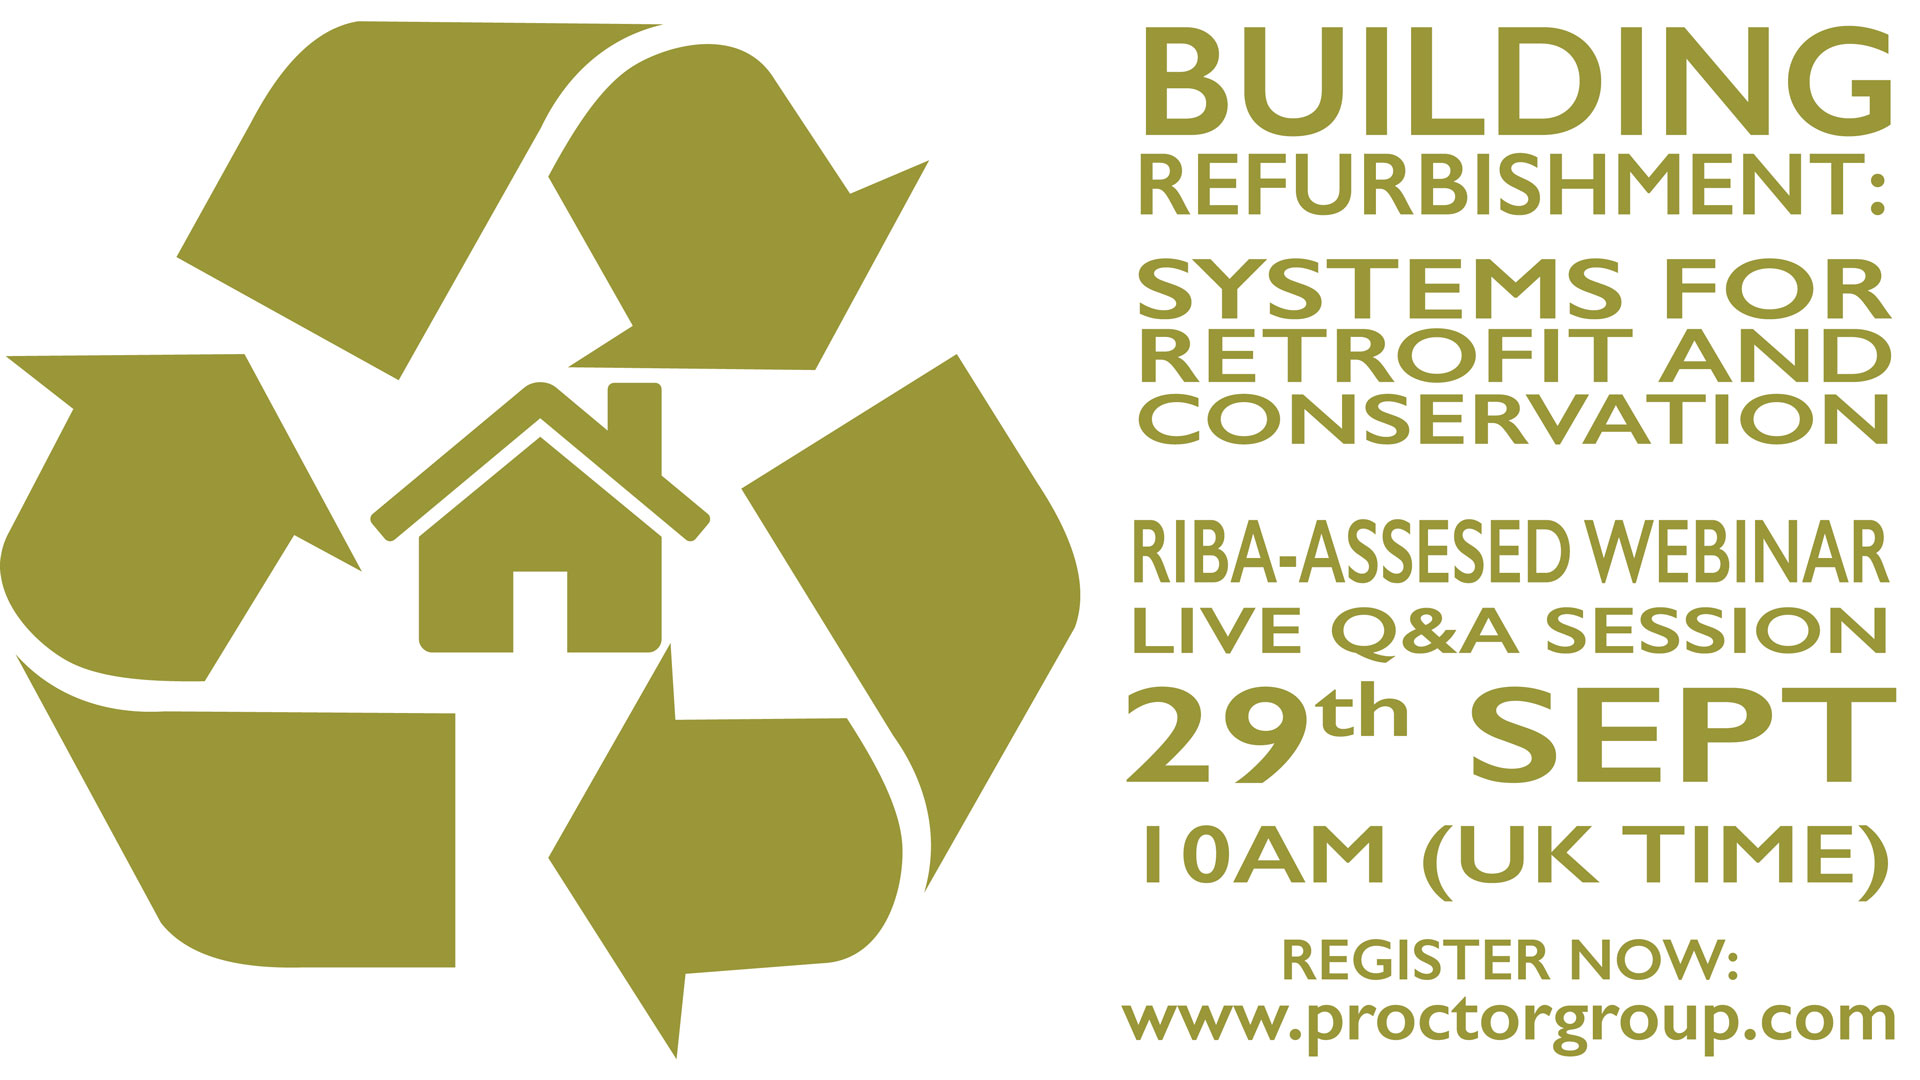 This RIBA-assessed CPD webinar provides an overview of the factors to consider in refurbishment and conservation projects, including the basics of building physics as related to hygrothermal design. It also provides an overview of the standards, regulations and frameworks involved in designing for retrofit and conservation.